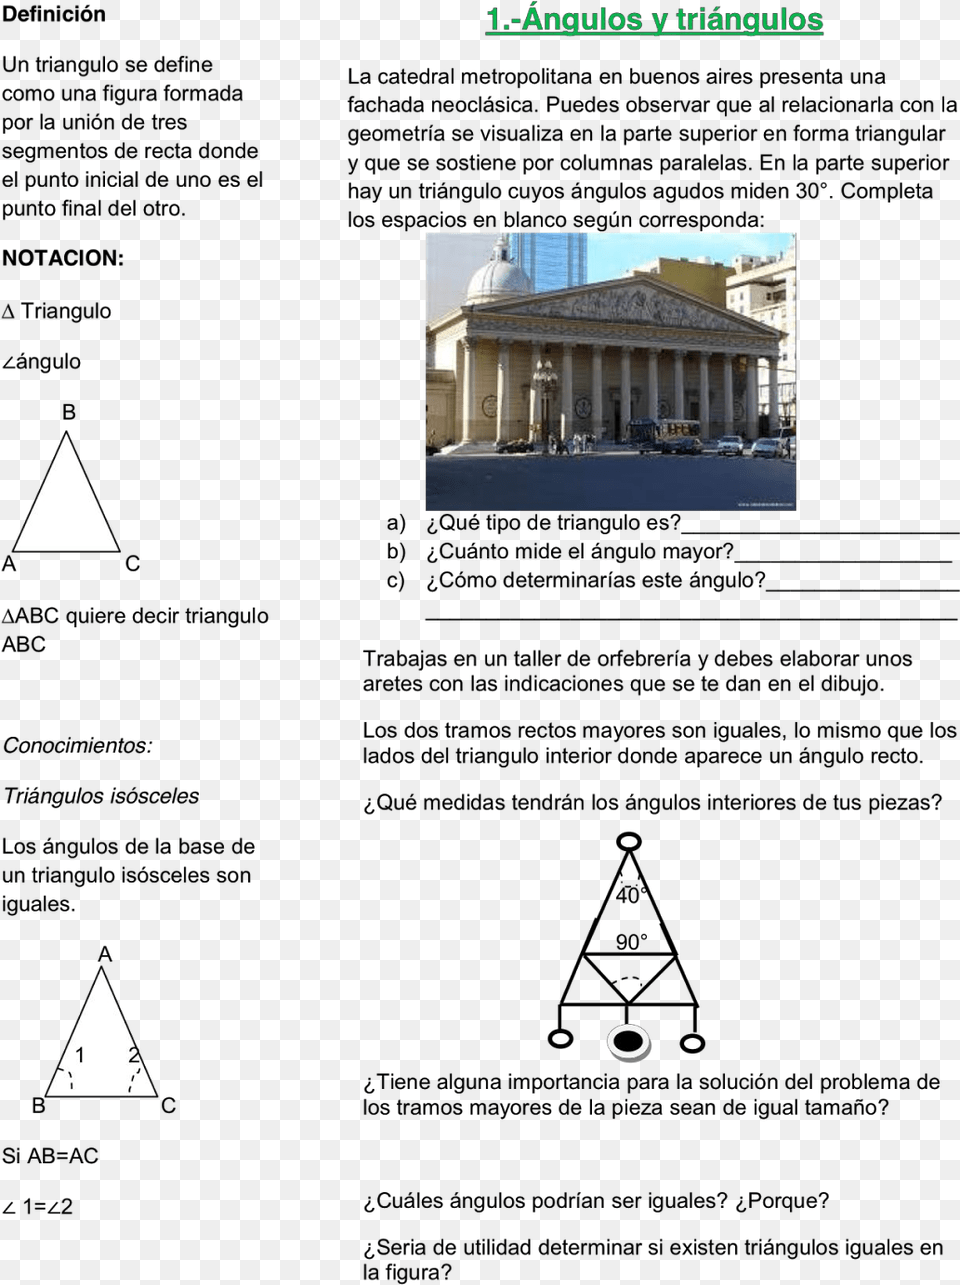 Triangulos Buenos Aires Metropolitan Cathedral, Architecture, Building, Triangle Png Image